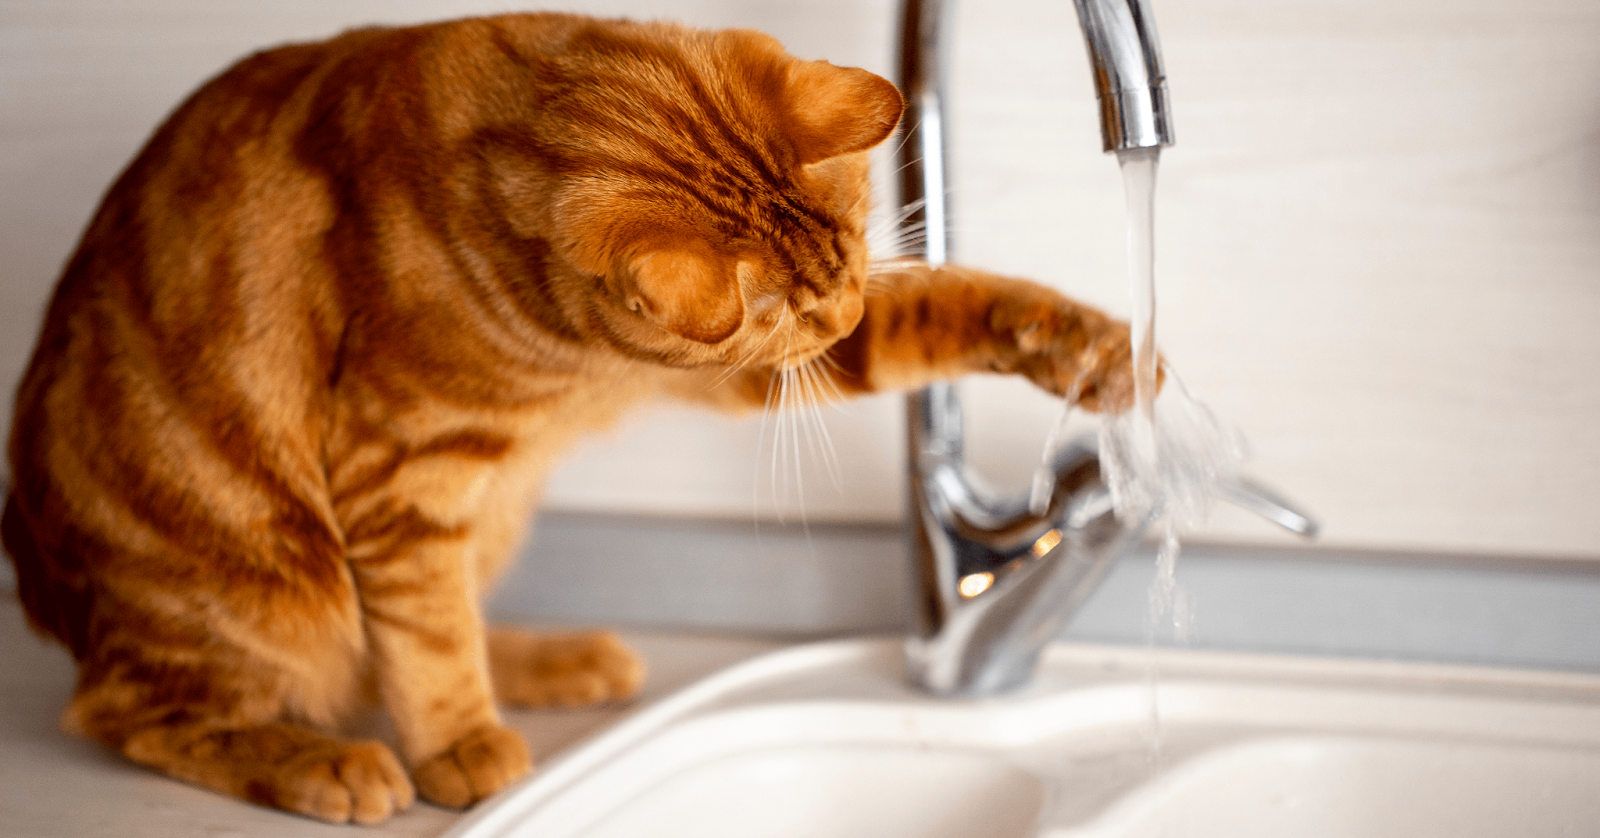 orange cat playing with water coming out of faucet